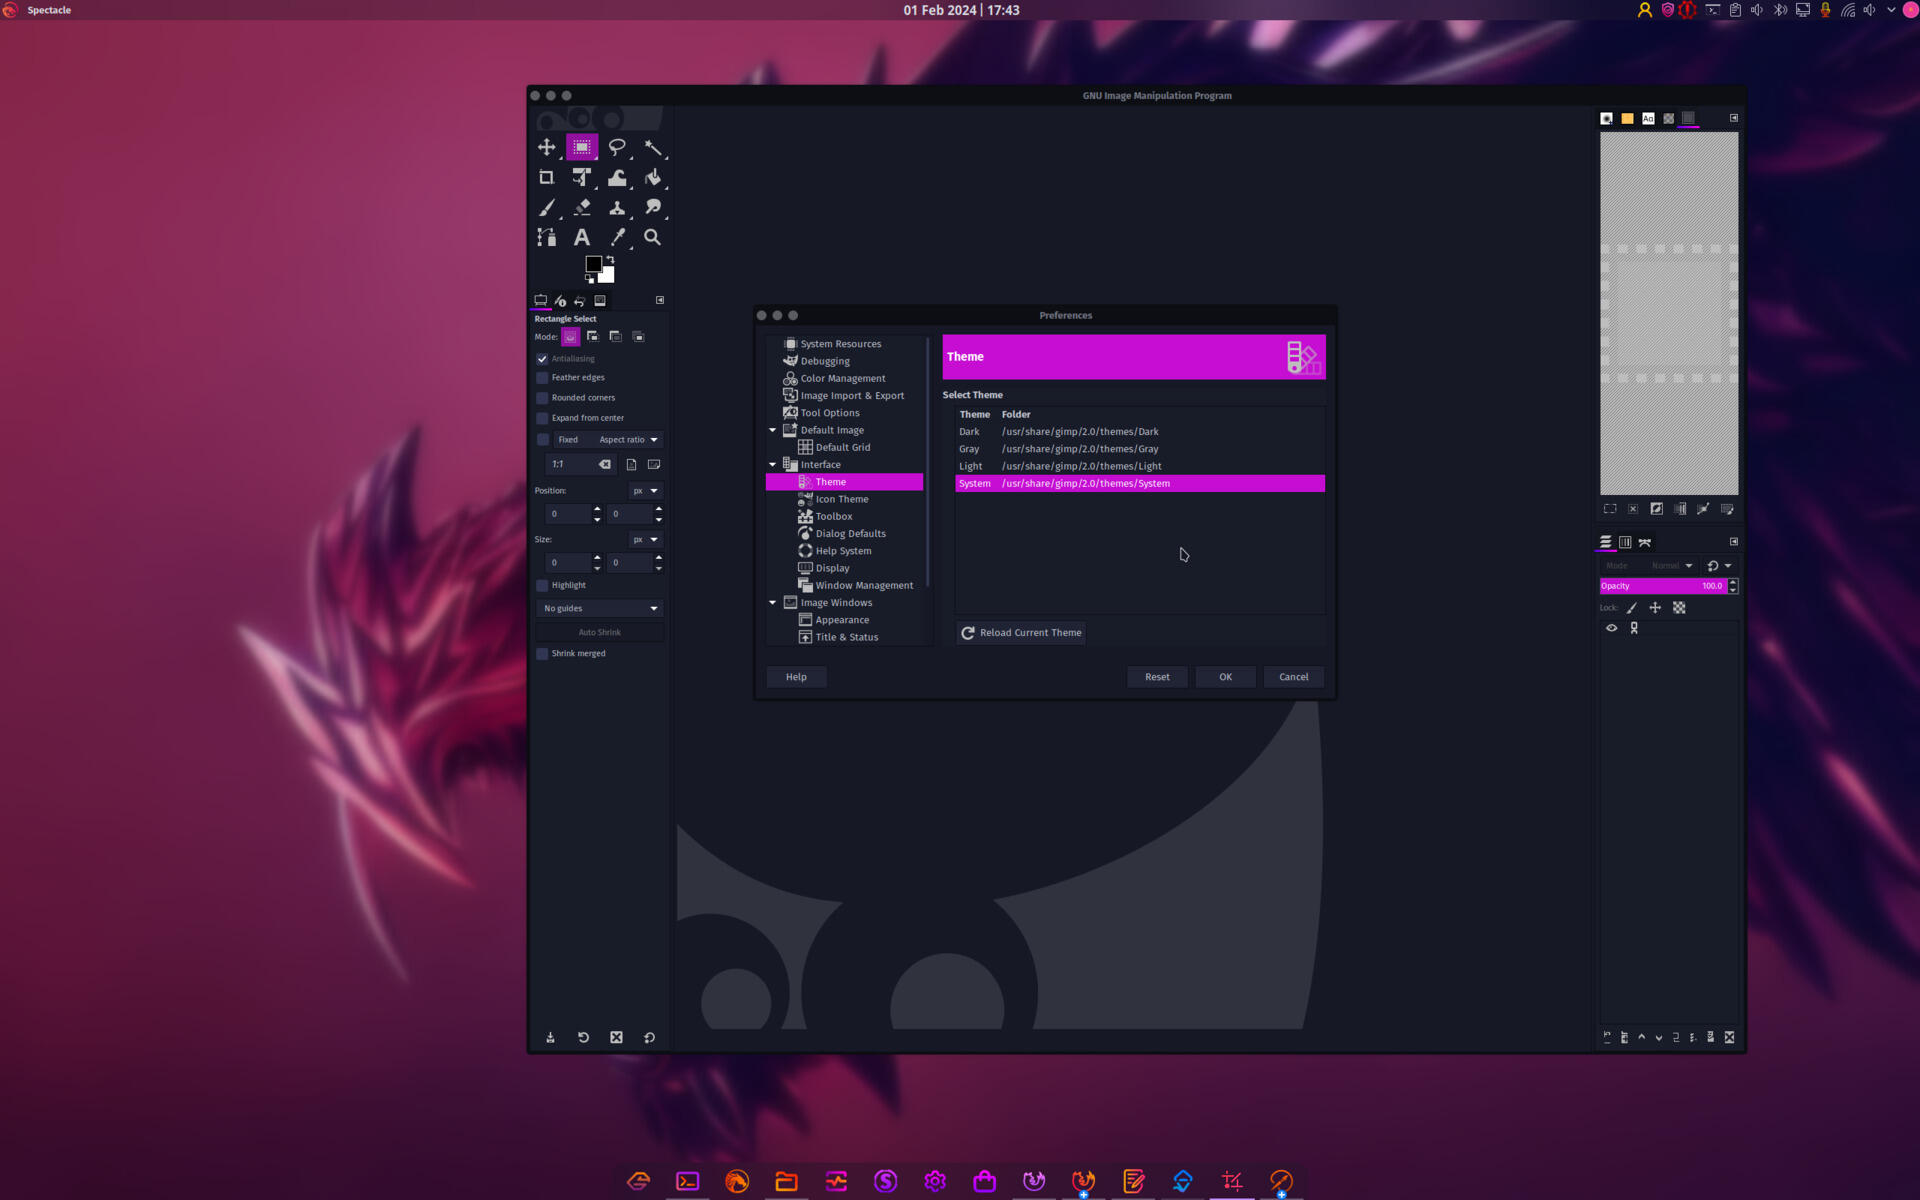 GIMP running on Garuda Linux's KDE Plasma Desktop with its menu integrated in the top panel and its Preferences dialog open on themes item